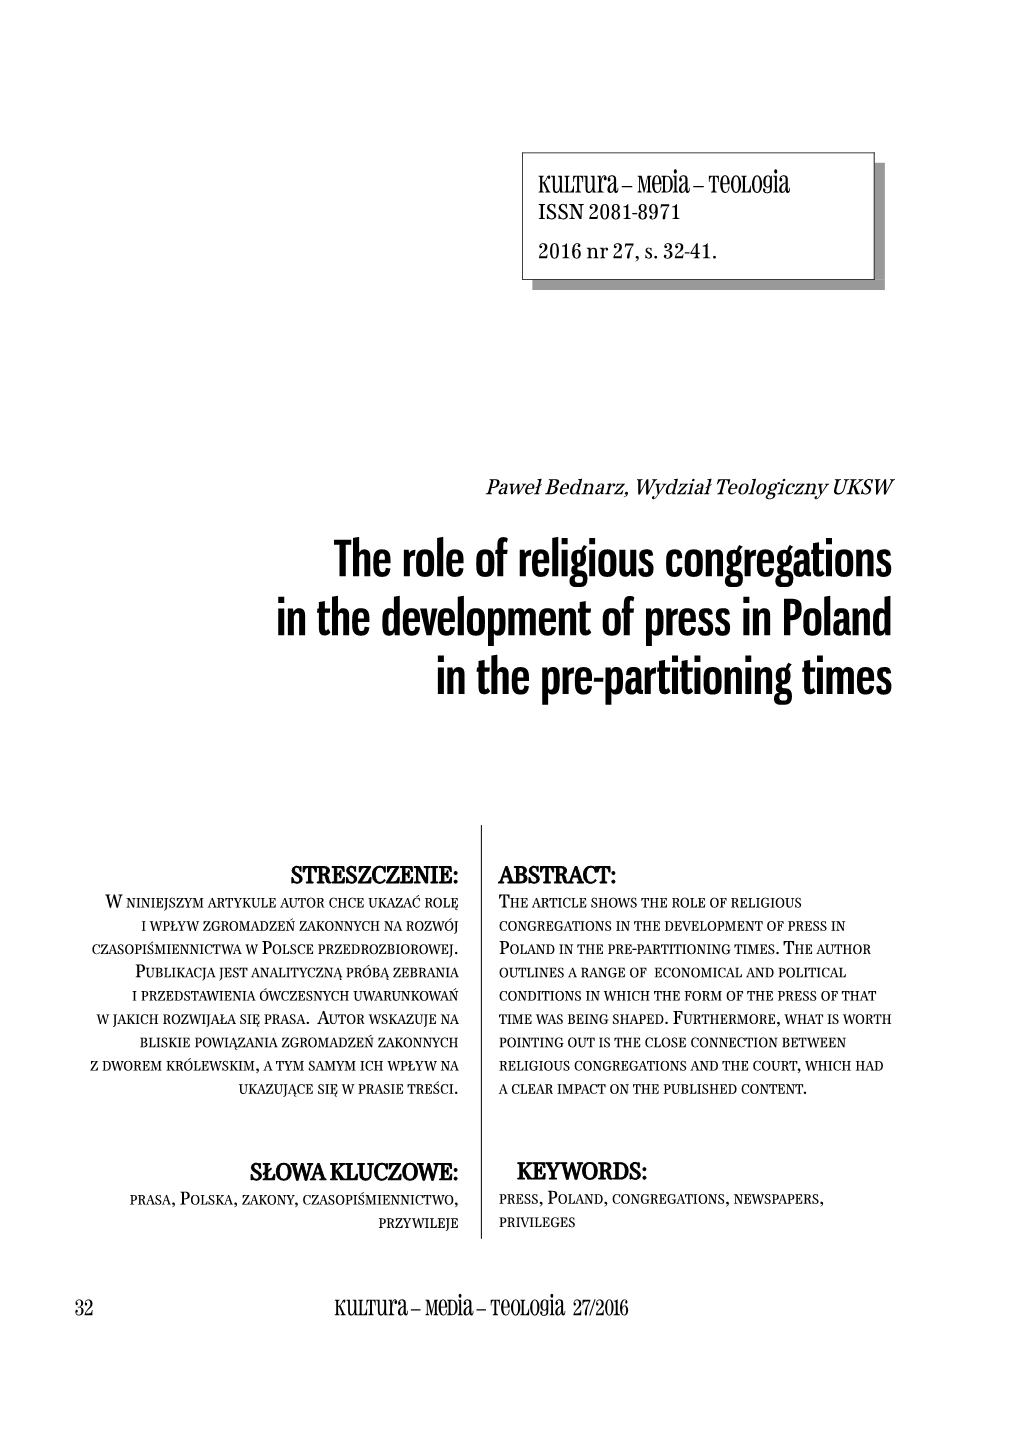 The Role of Religious Congregations in the Development of Press in Poland in the Pre-Partitioning Times